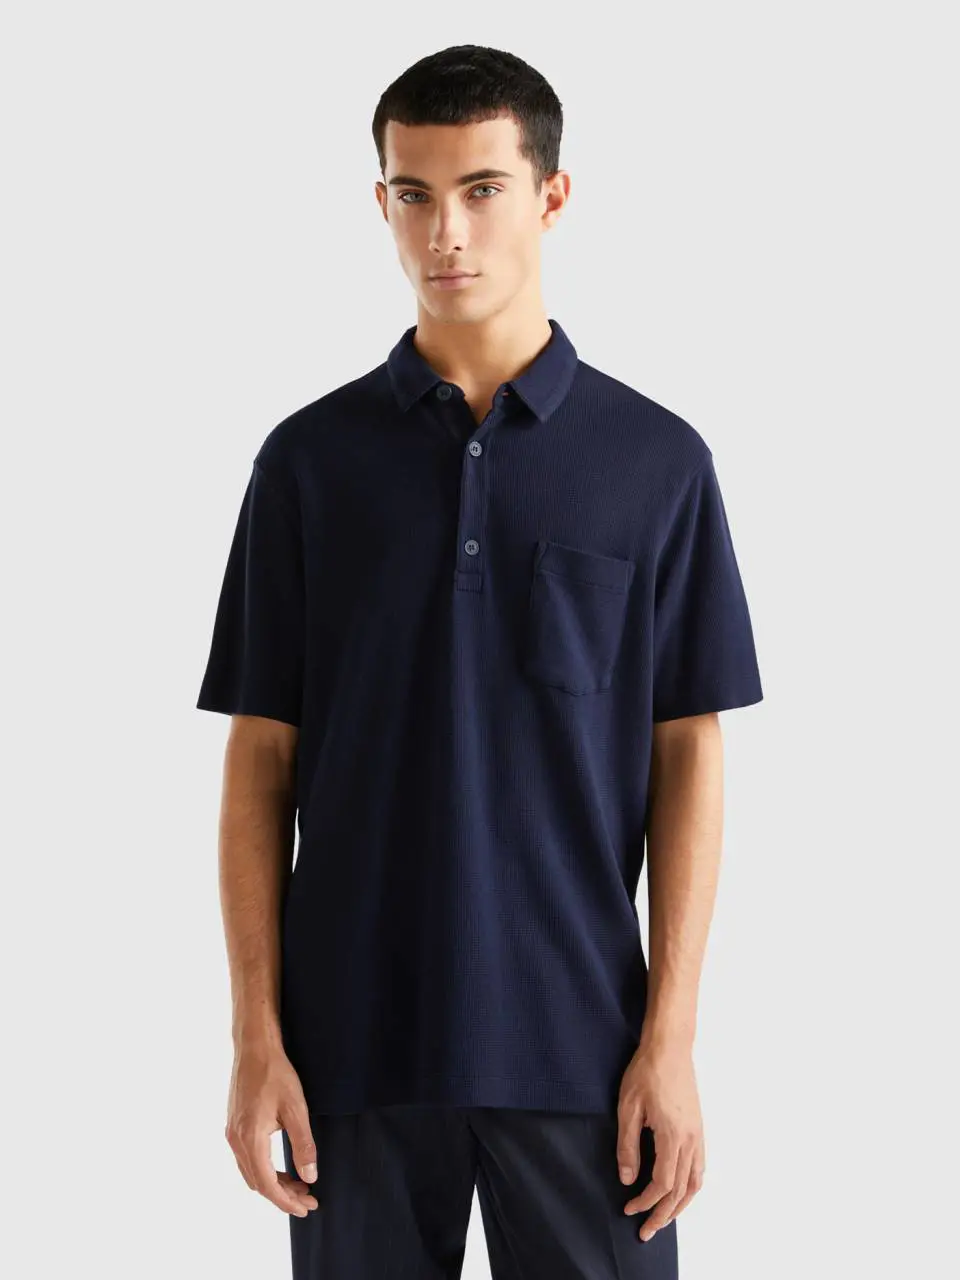 Benetton polo with pocket and relaxed fit. 1